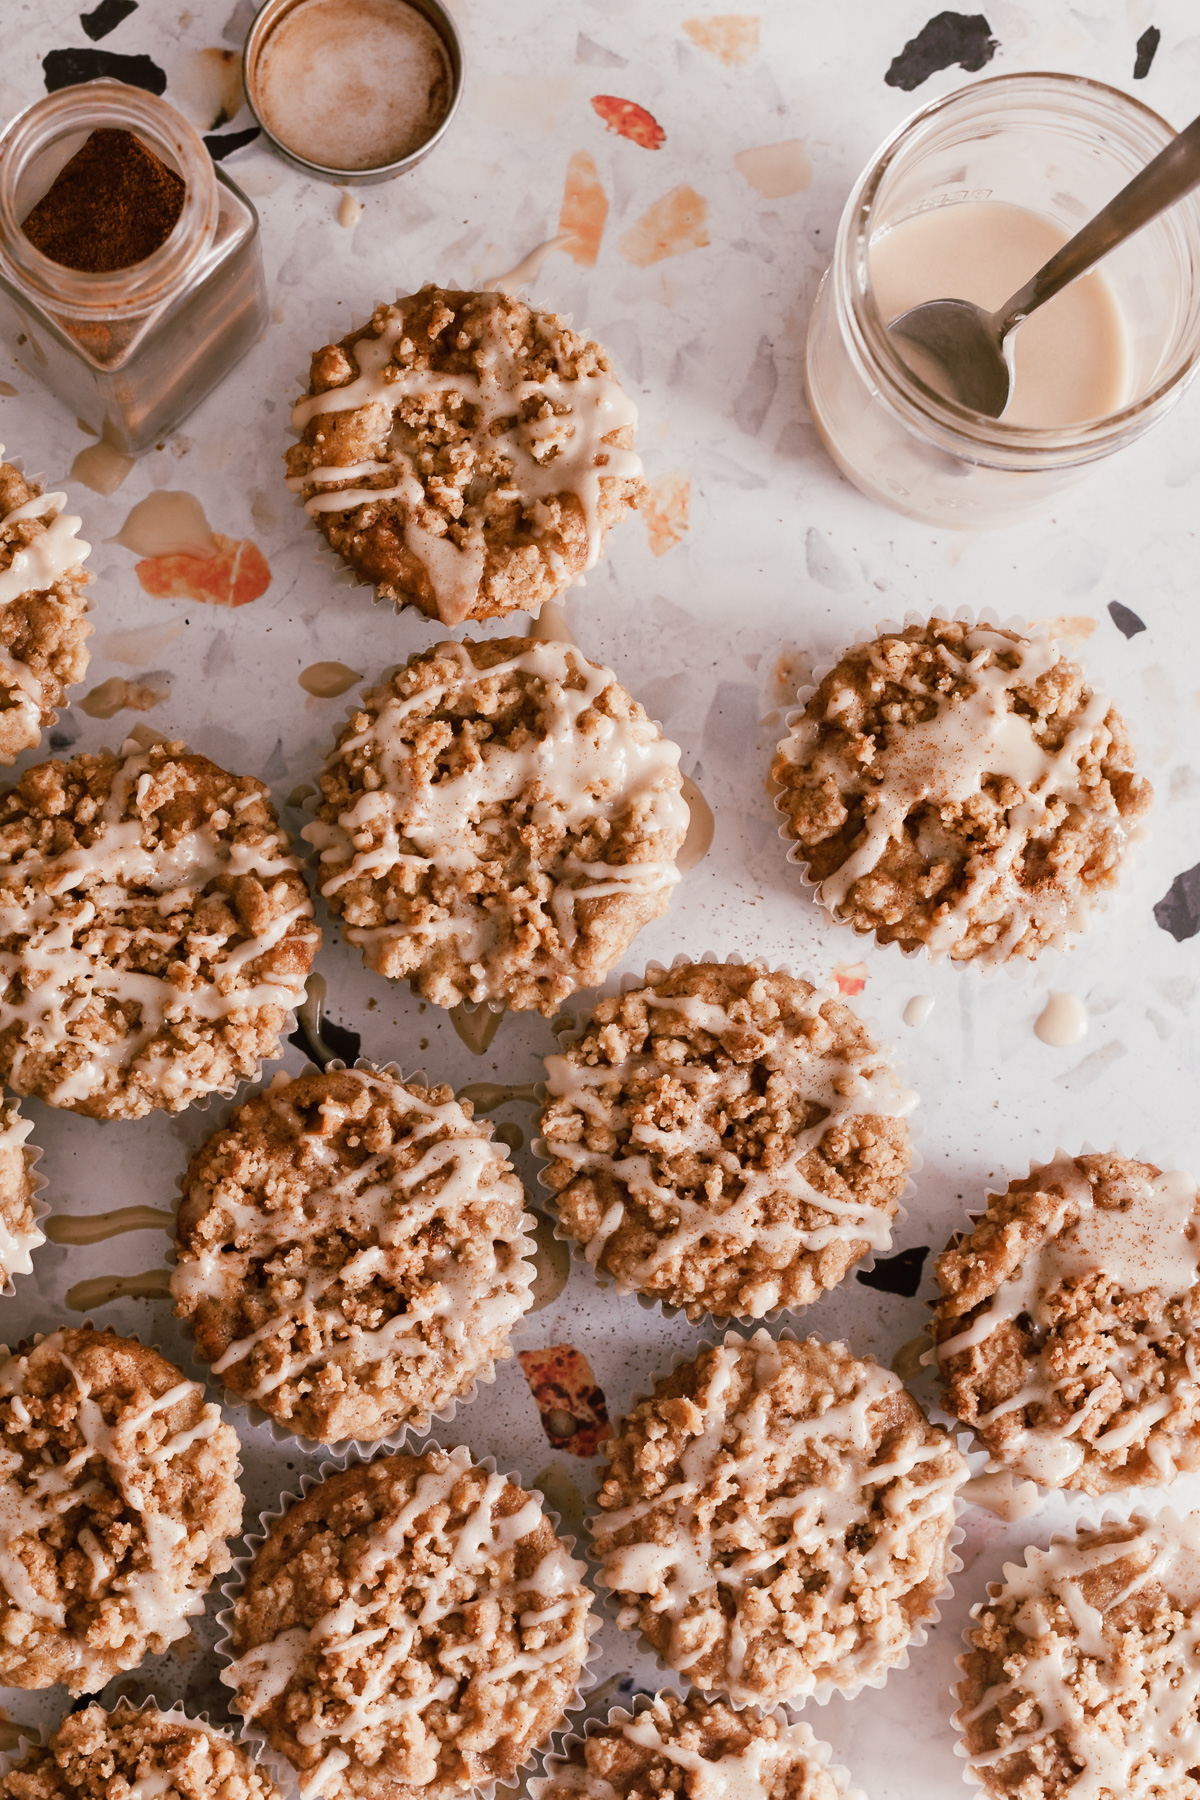 Apple Sourdough Muffins with Crumble Topping